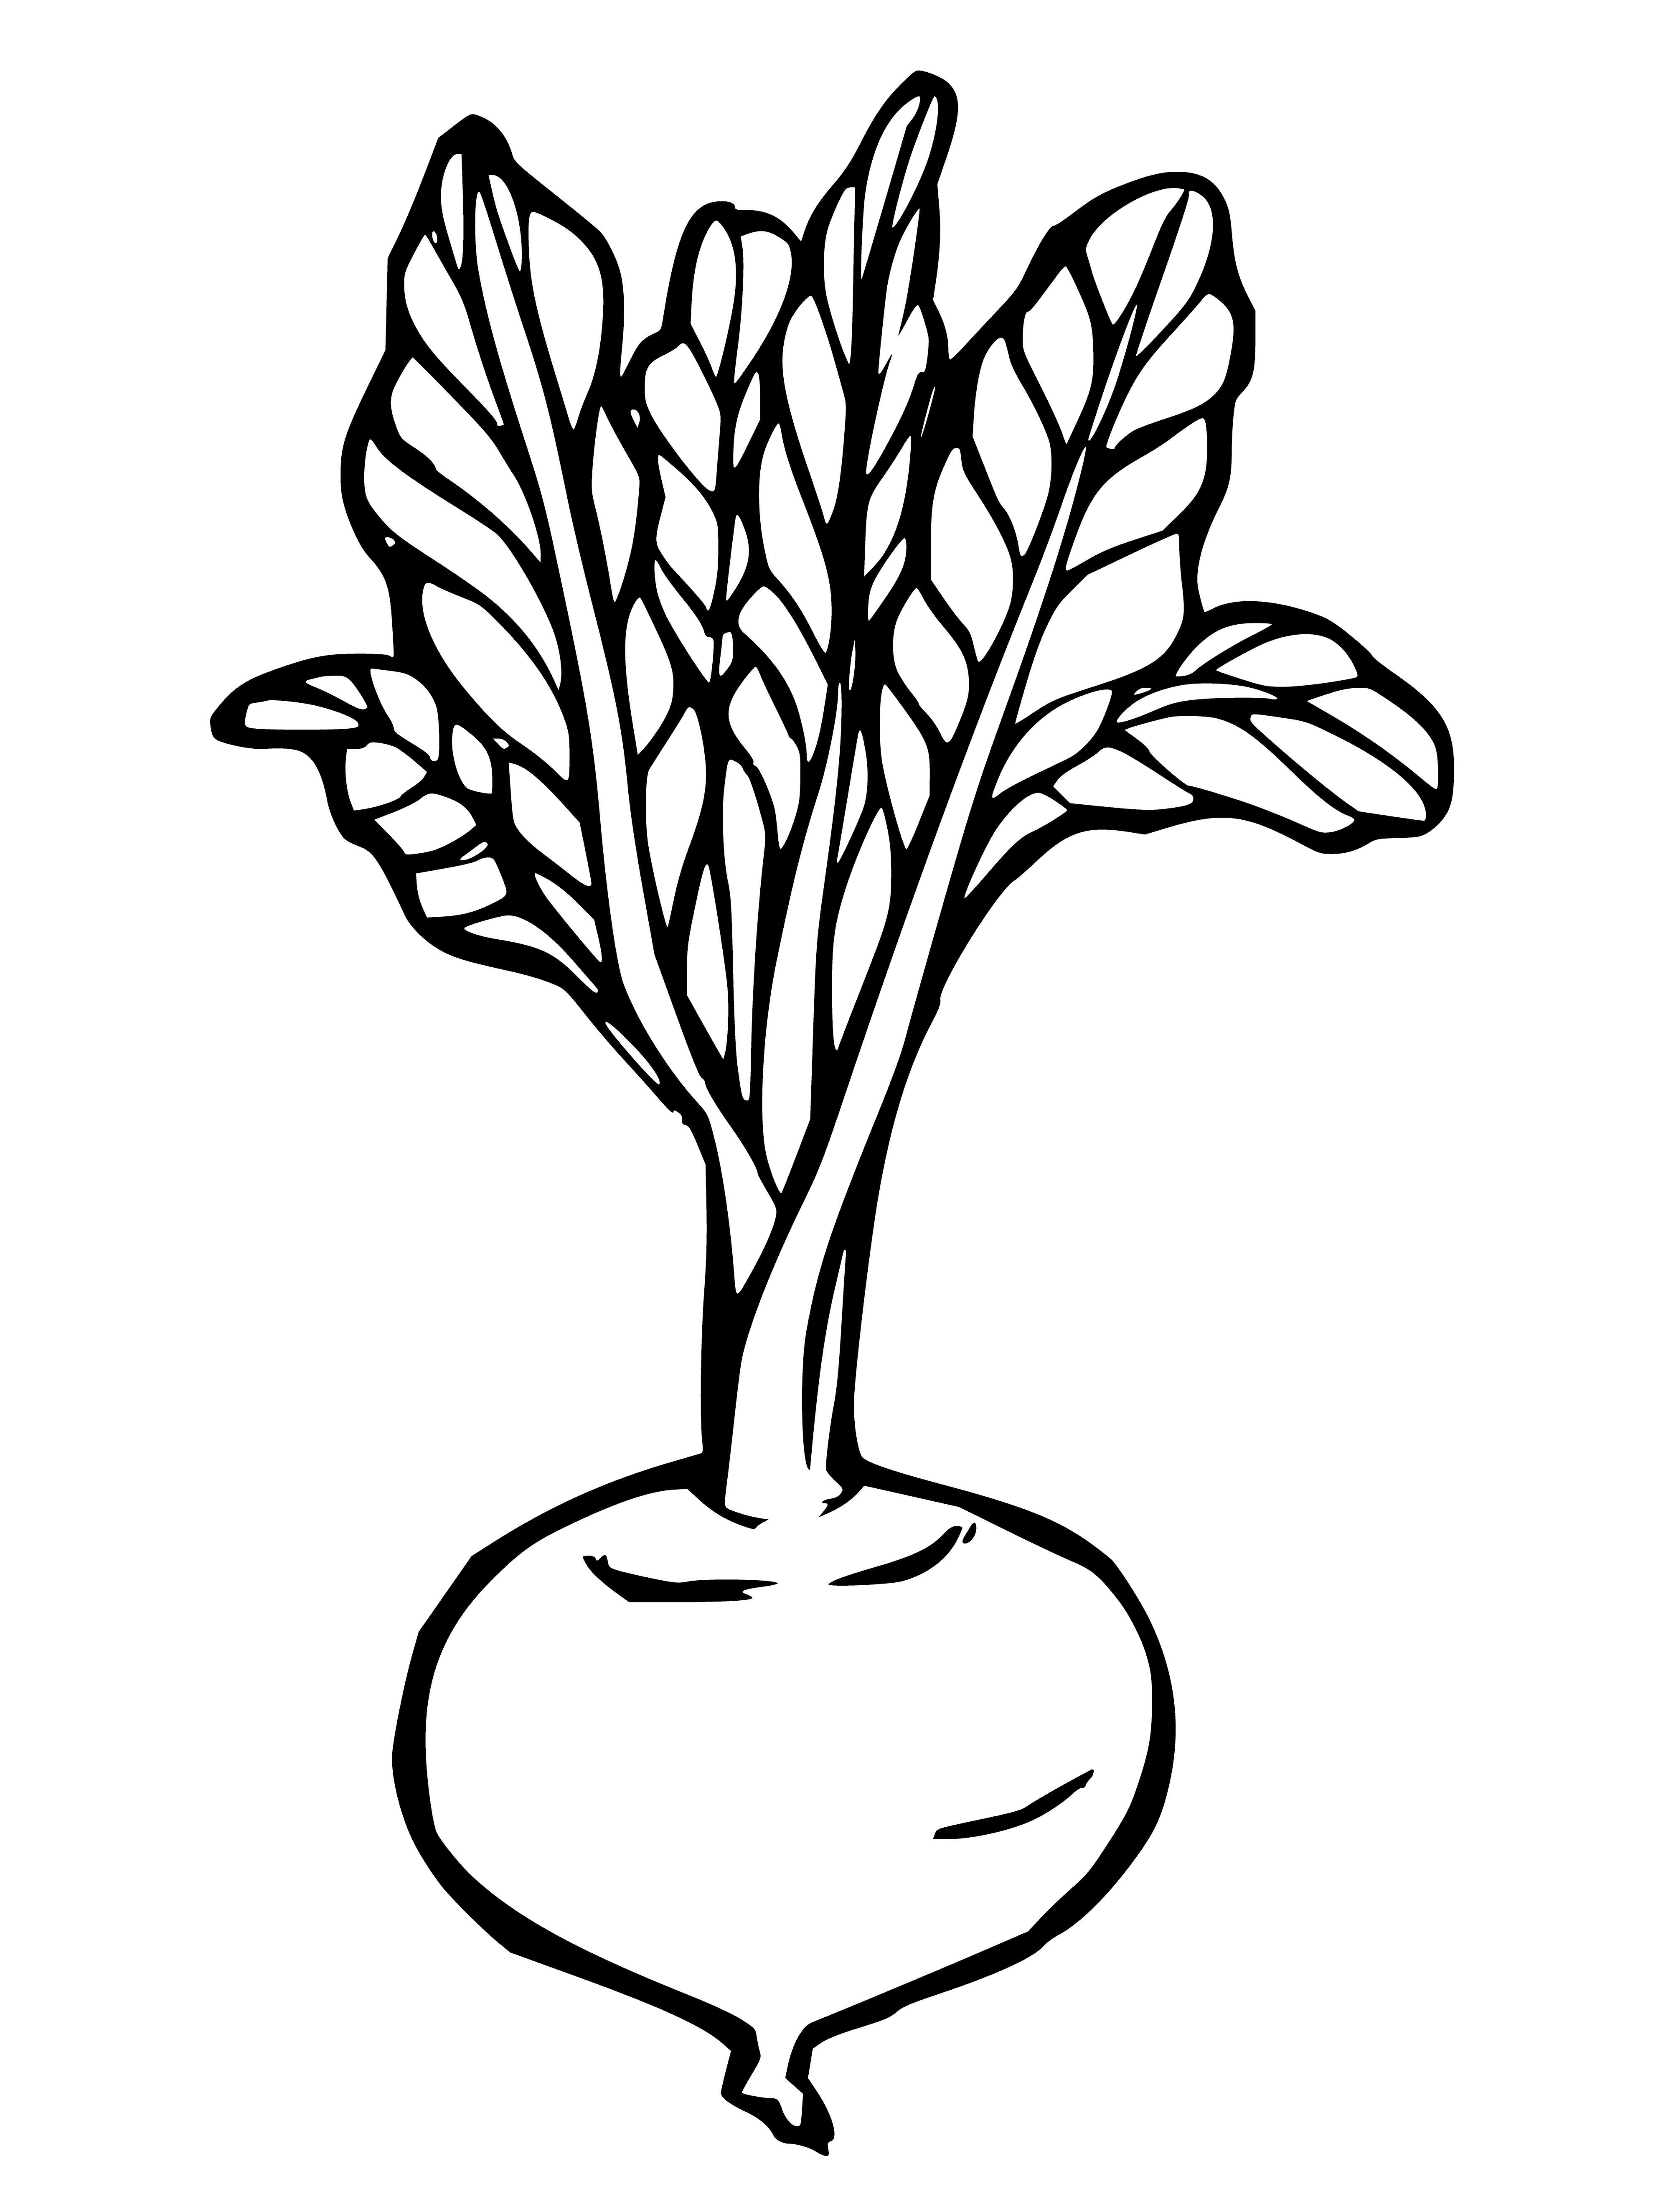 coloring page: Three beets in a bowl: dark red skin, white inner flesh. A coloring page to enjoy. #vegetables #drawing #coloringbook